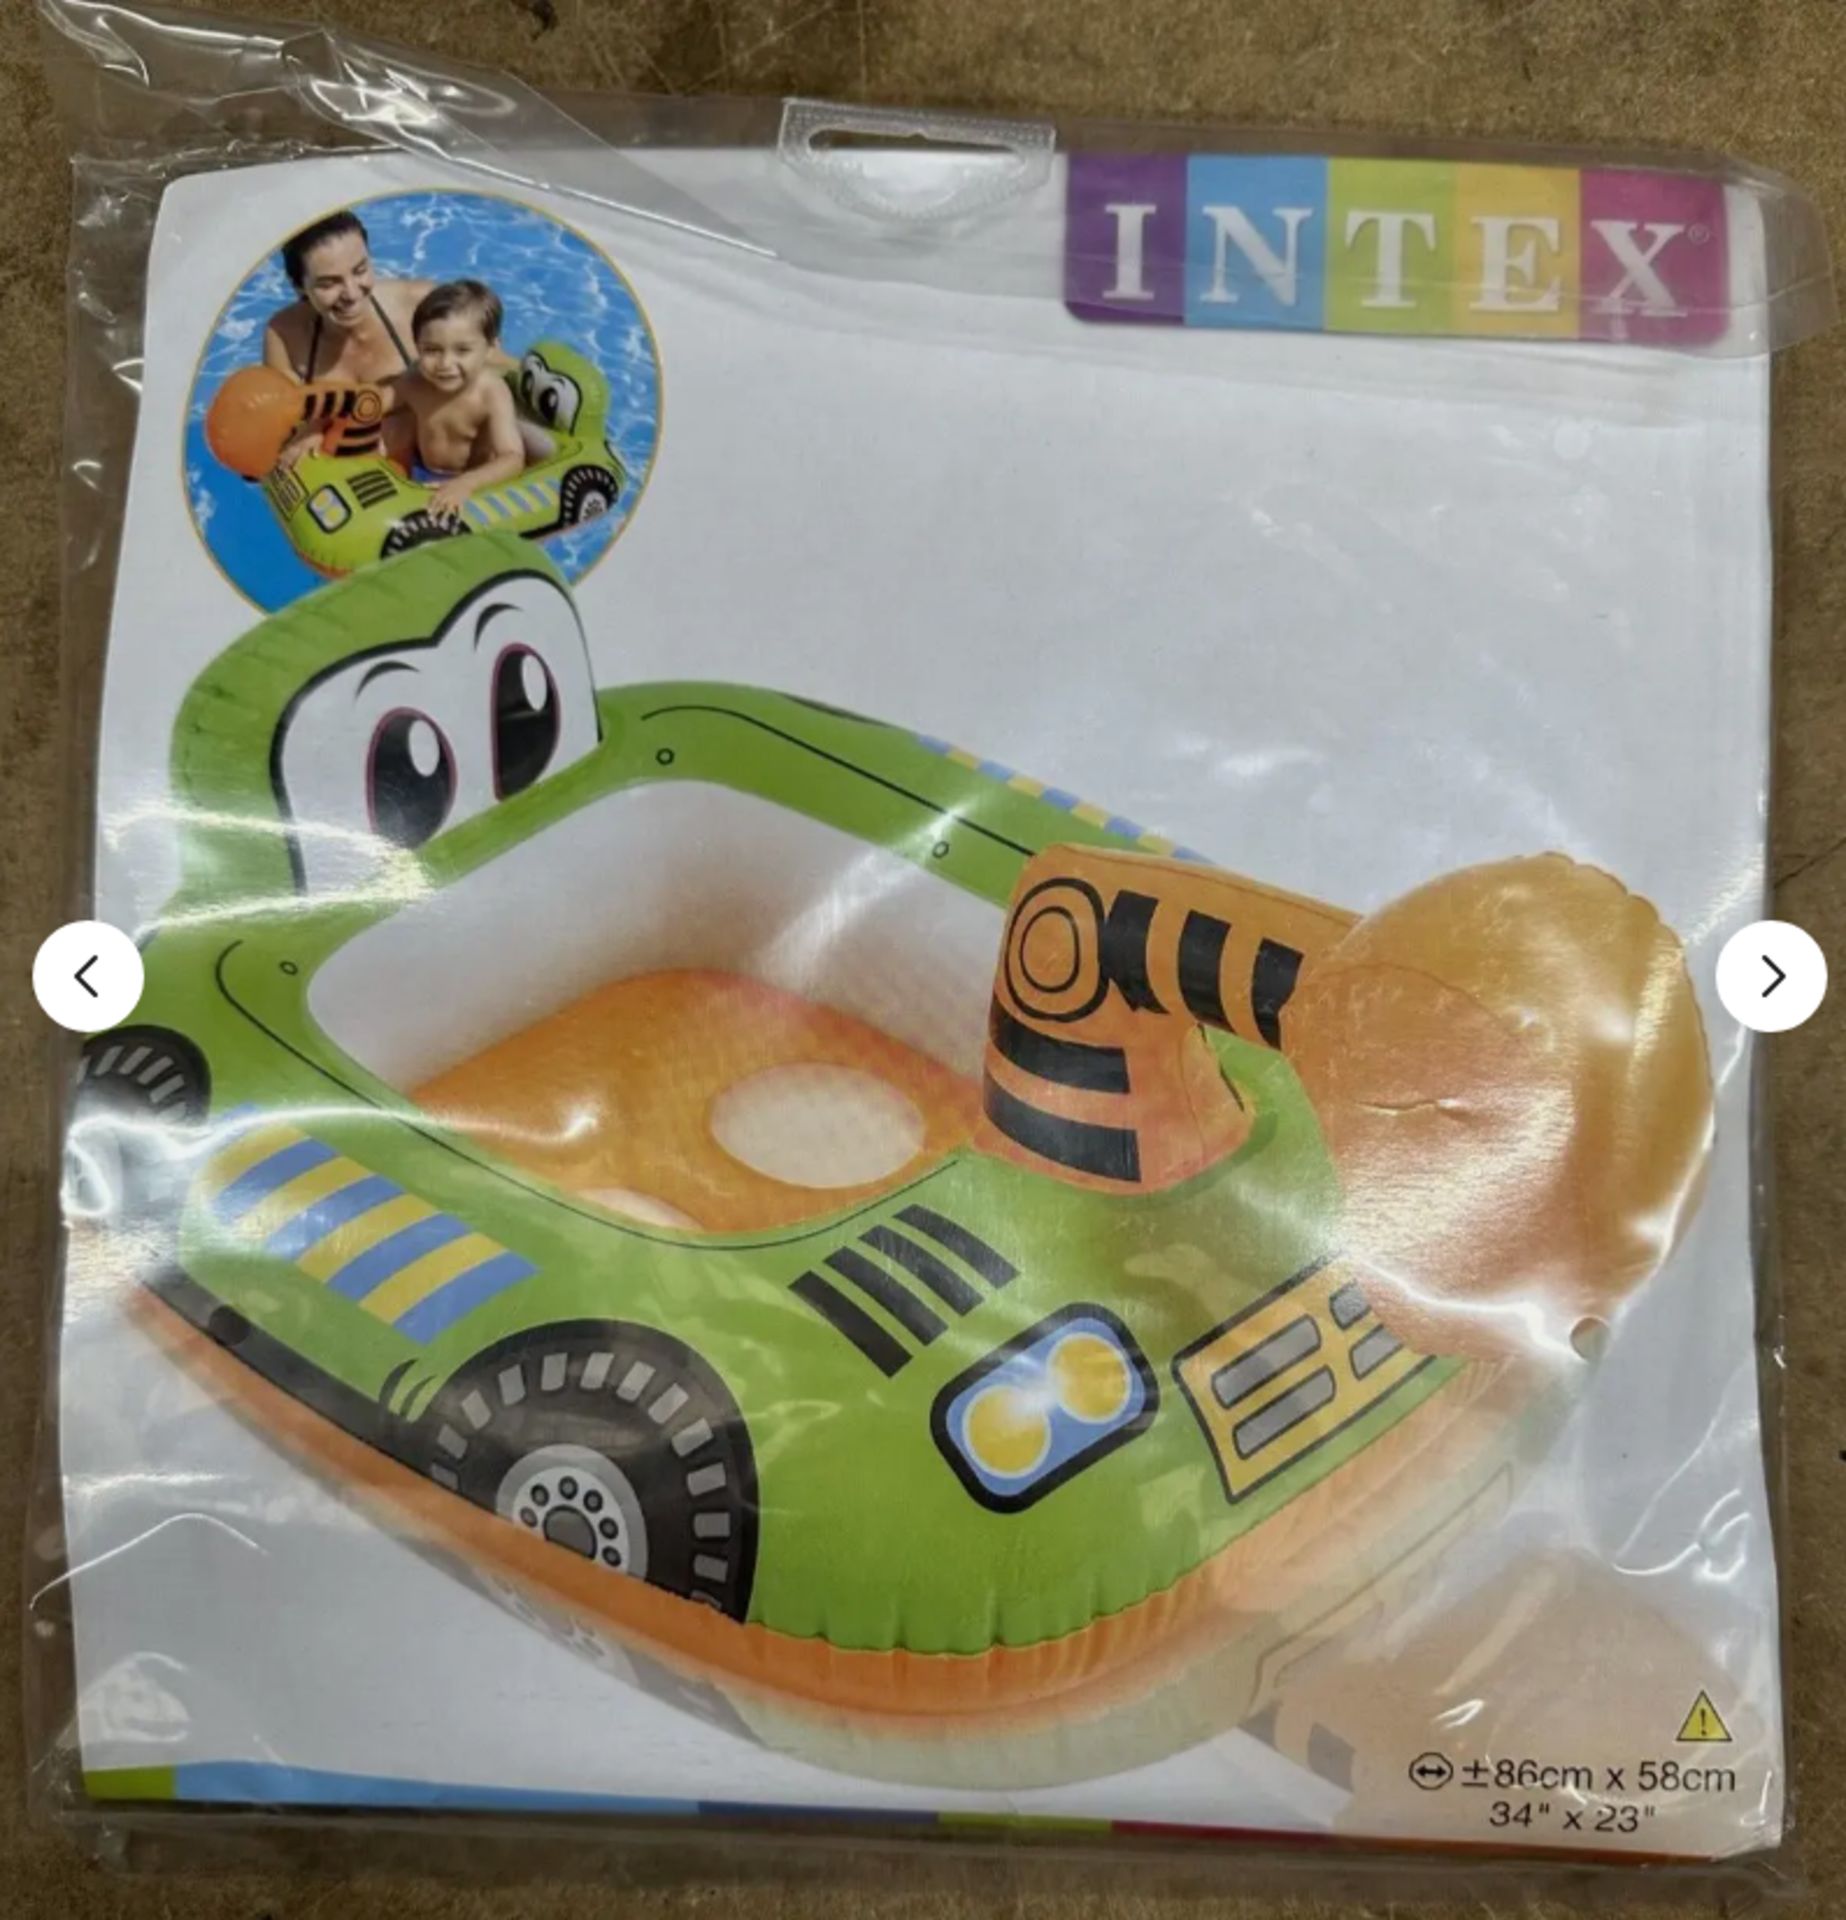 50 x Intex Inflatable Swimming Pool Float Kids Floatation (Mix of Themes). RRP £300 - Grade A